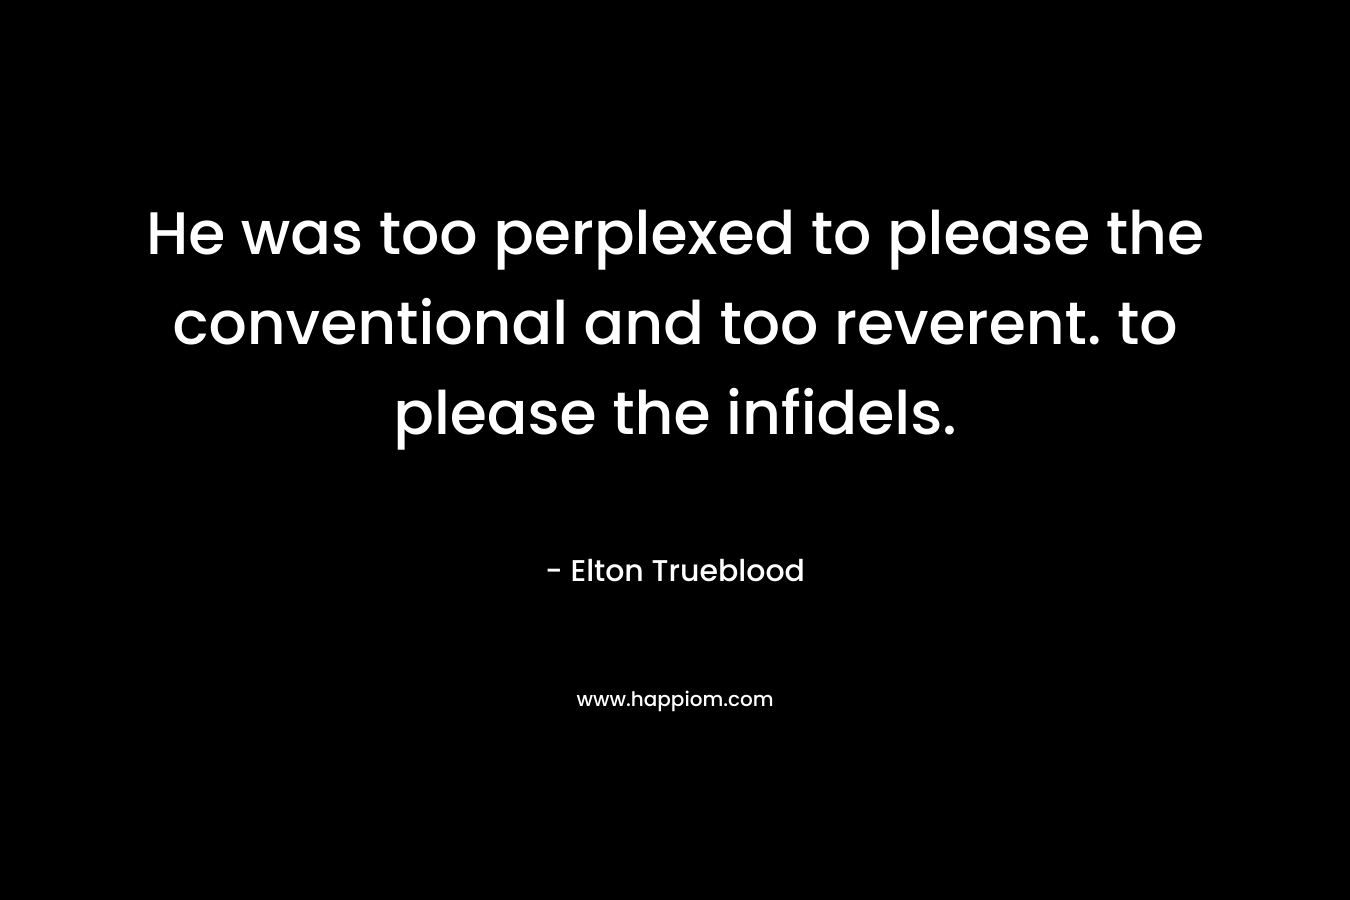 He was too perplexed to please the conventional and too reverent. to please the infidels. – Elton Trueblood